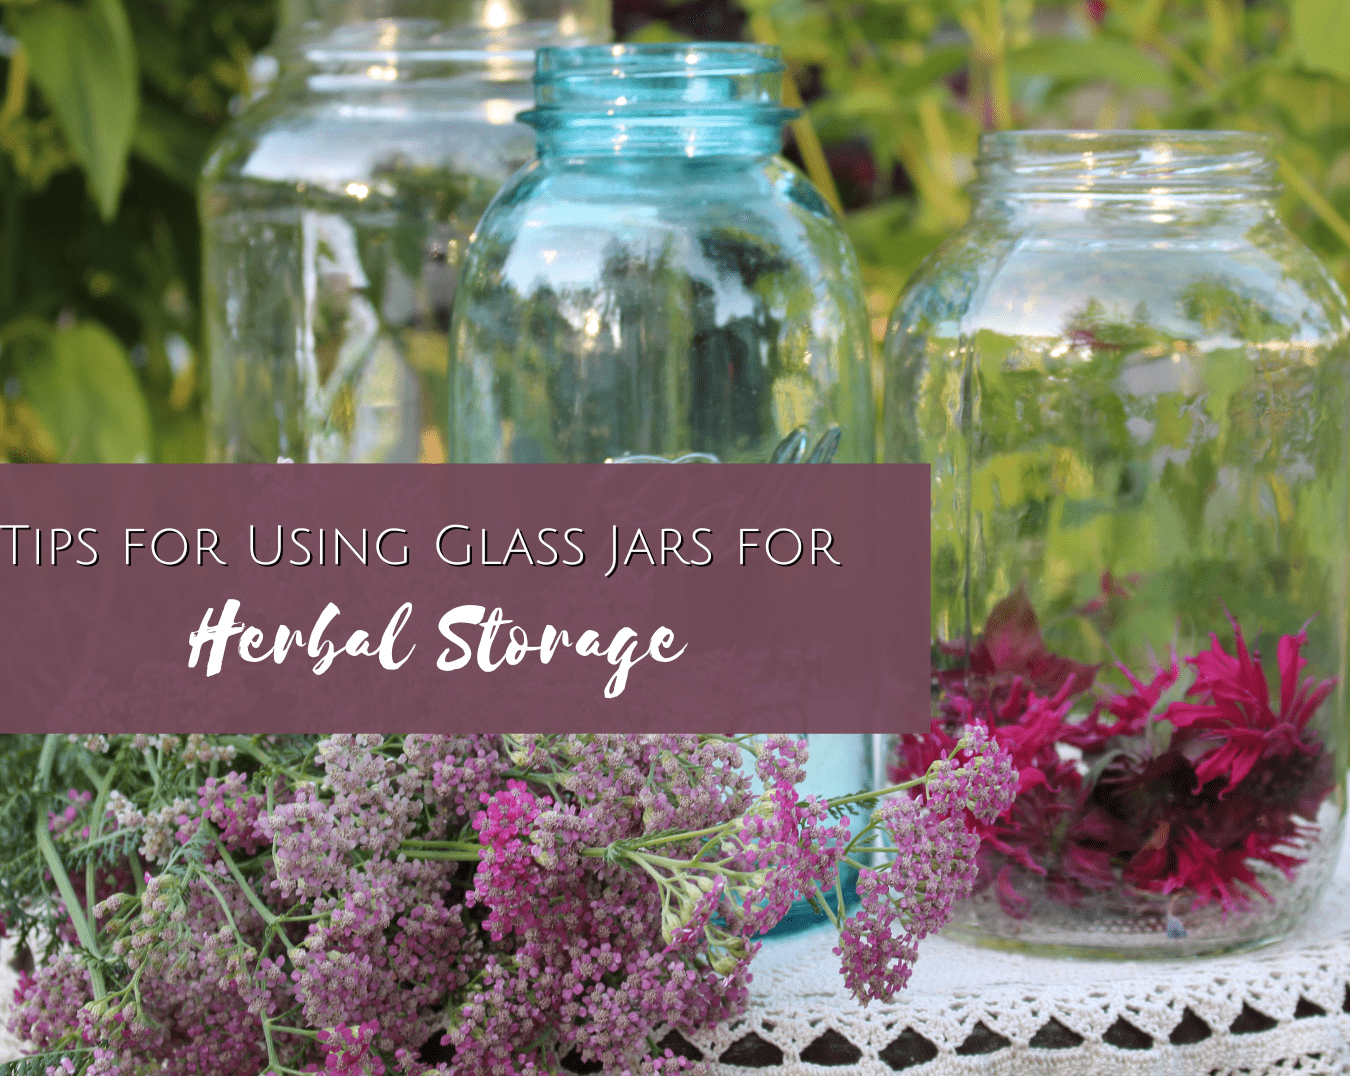 Tips for using glass jars for herb storage | Erin LaFaive